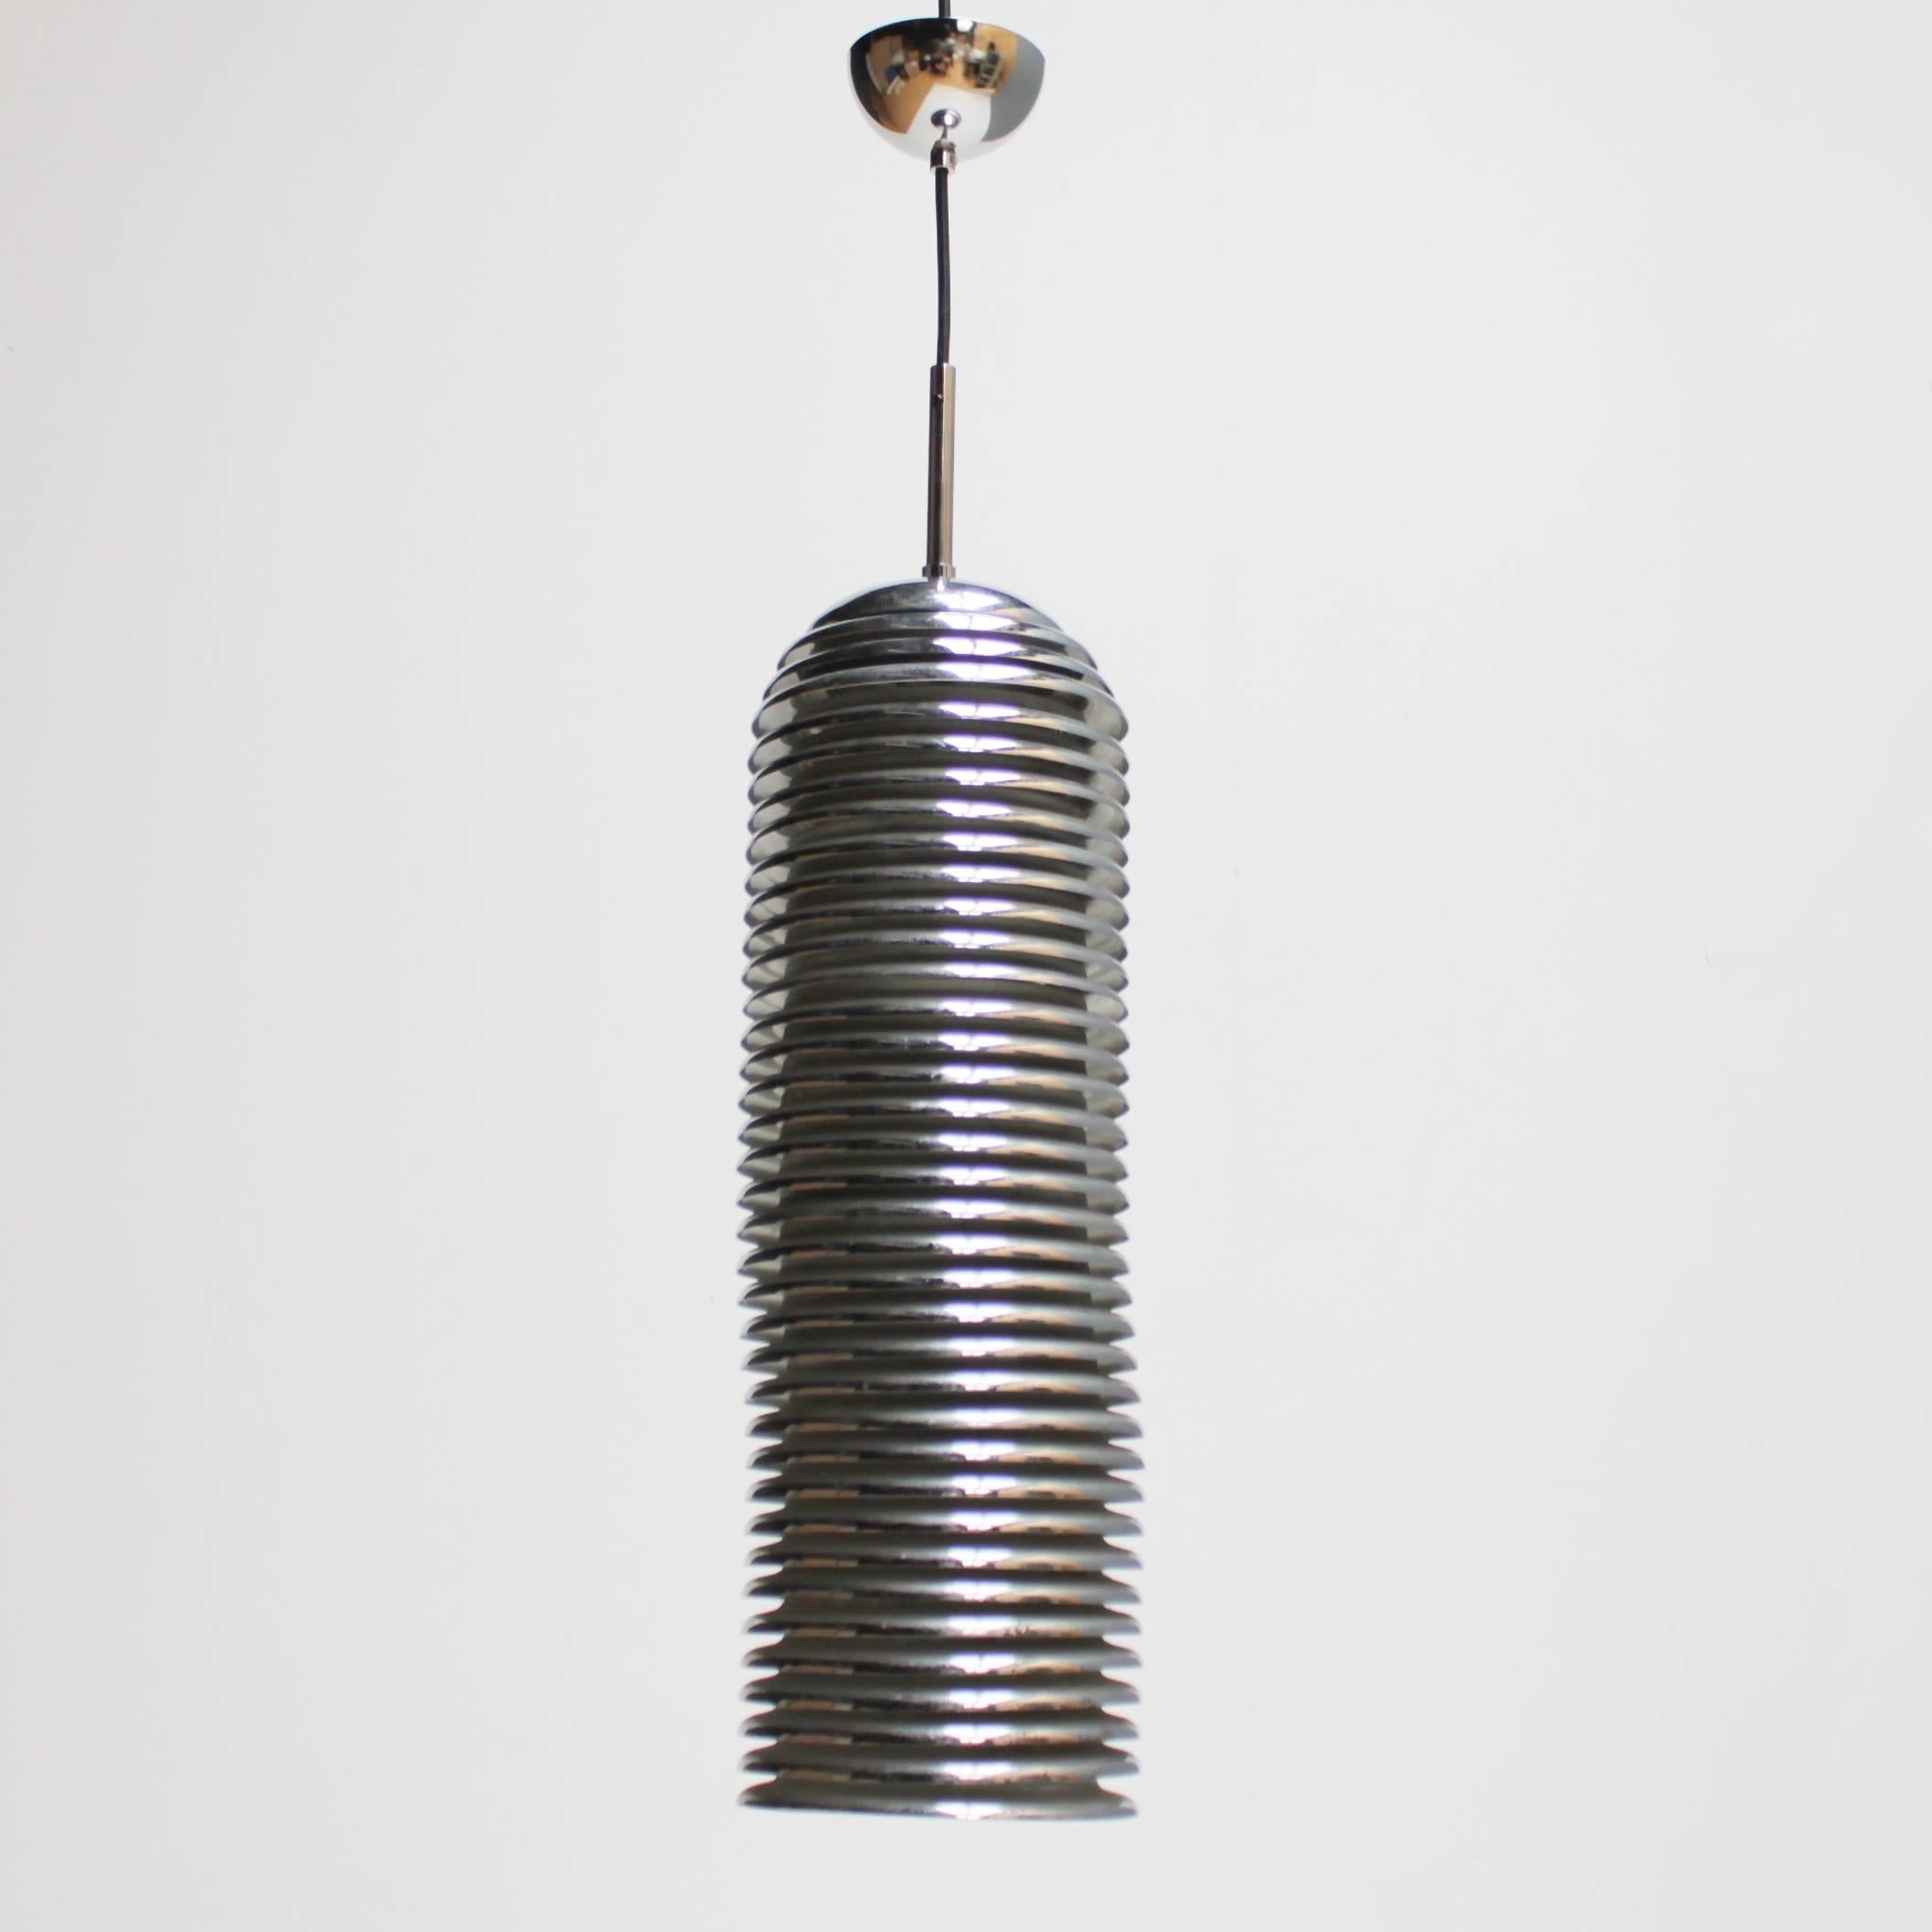 Large chromium plated pendant by Kazuo Motozawa for Staff Leuchten, Germany.
Founded in 1923, Yamagiwa has become a leading Japanese manufacturer of innovative and sophisticated lighting fixtures. Over the last decades the company employed several